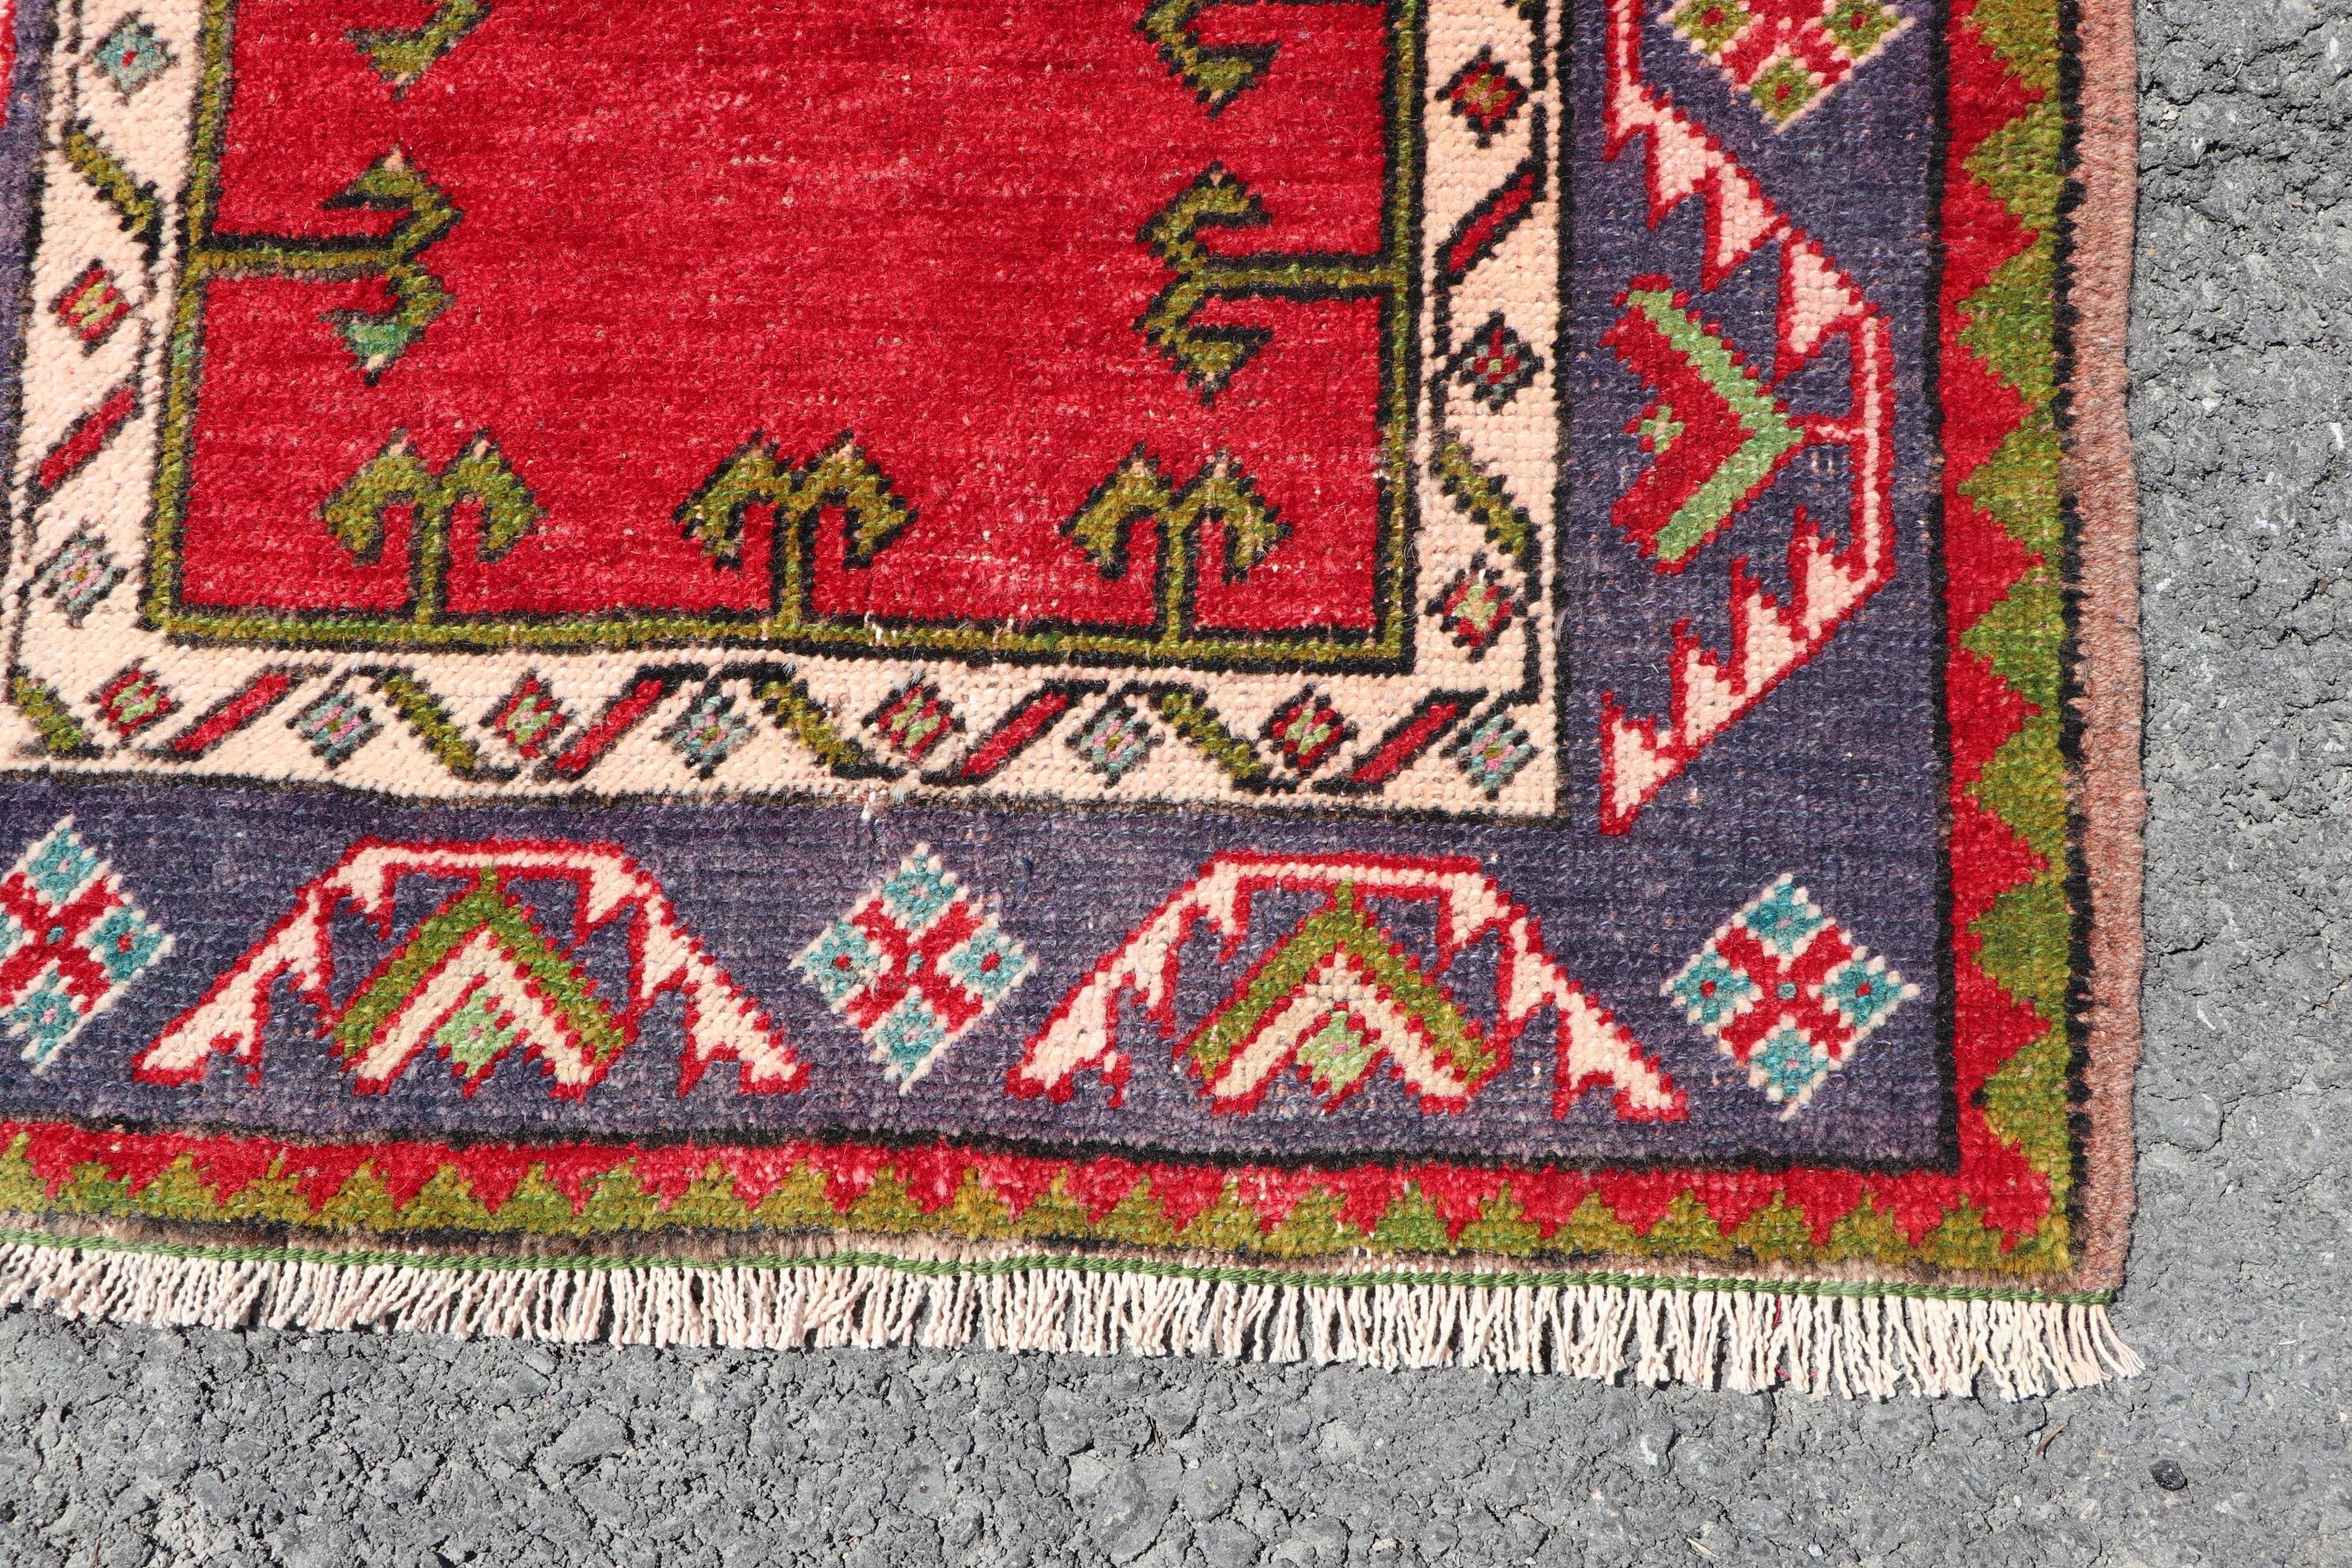 Floor Rugs, Entry Rug, Red Anatolian Rugs, Kitchen Rugs, Vintage Rugs, Cute Rug, Anatolian Rugs, Kilim, 2.3x3.8 ft Small Rugs, Turkish Rugs